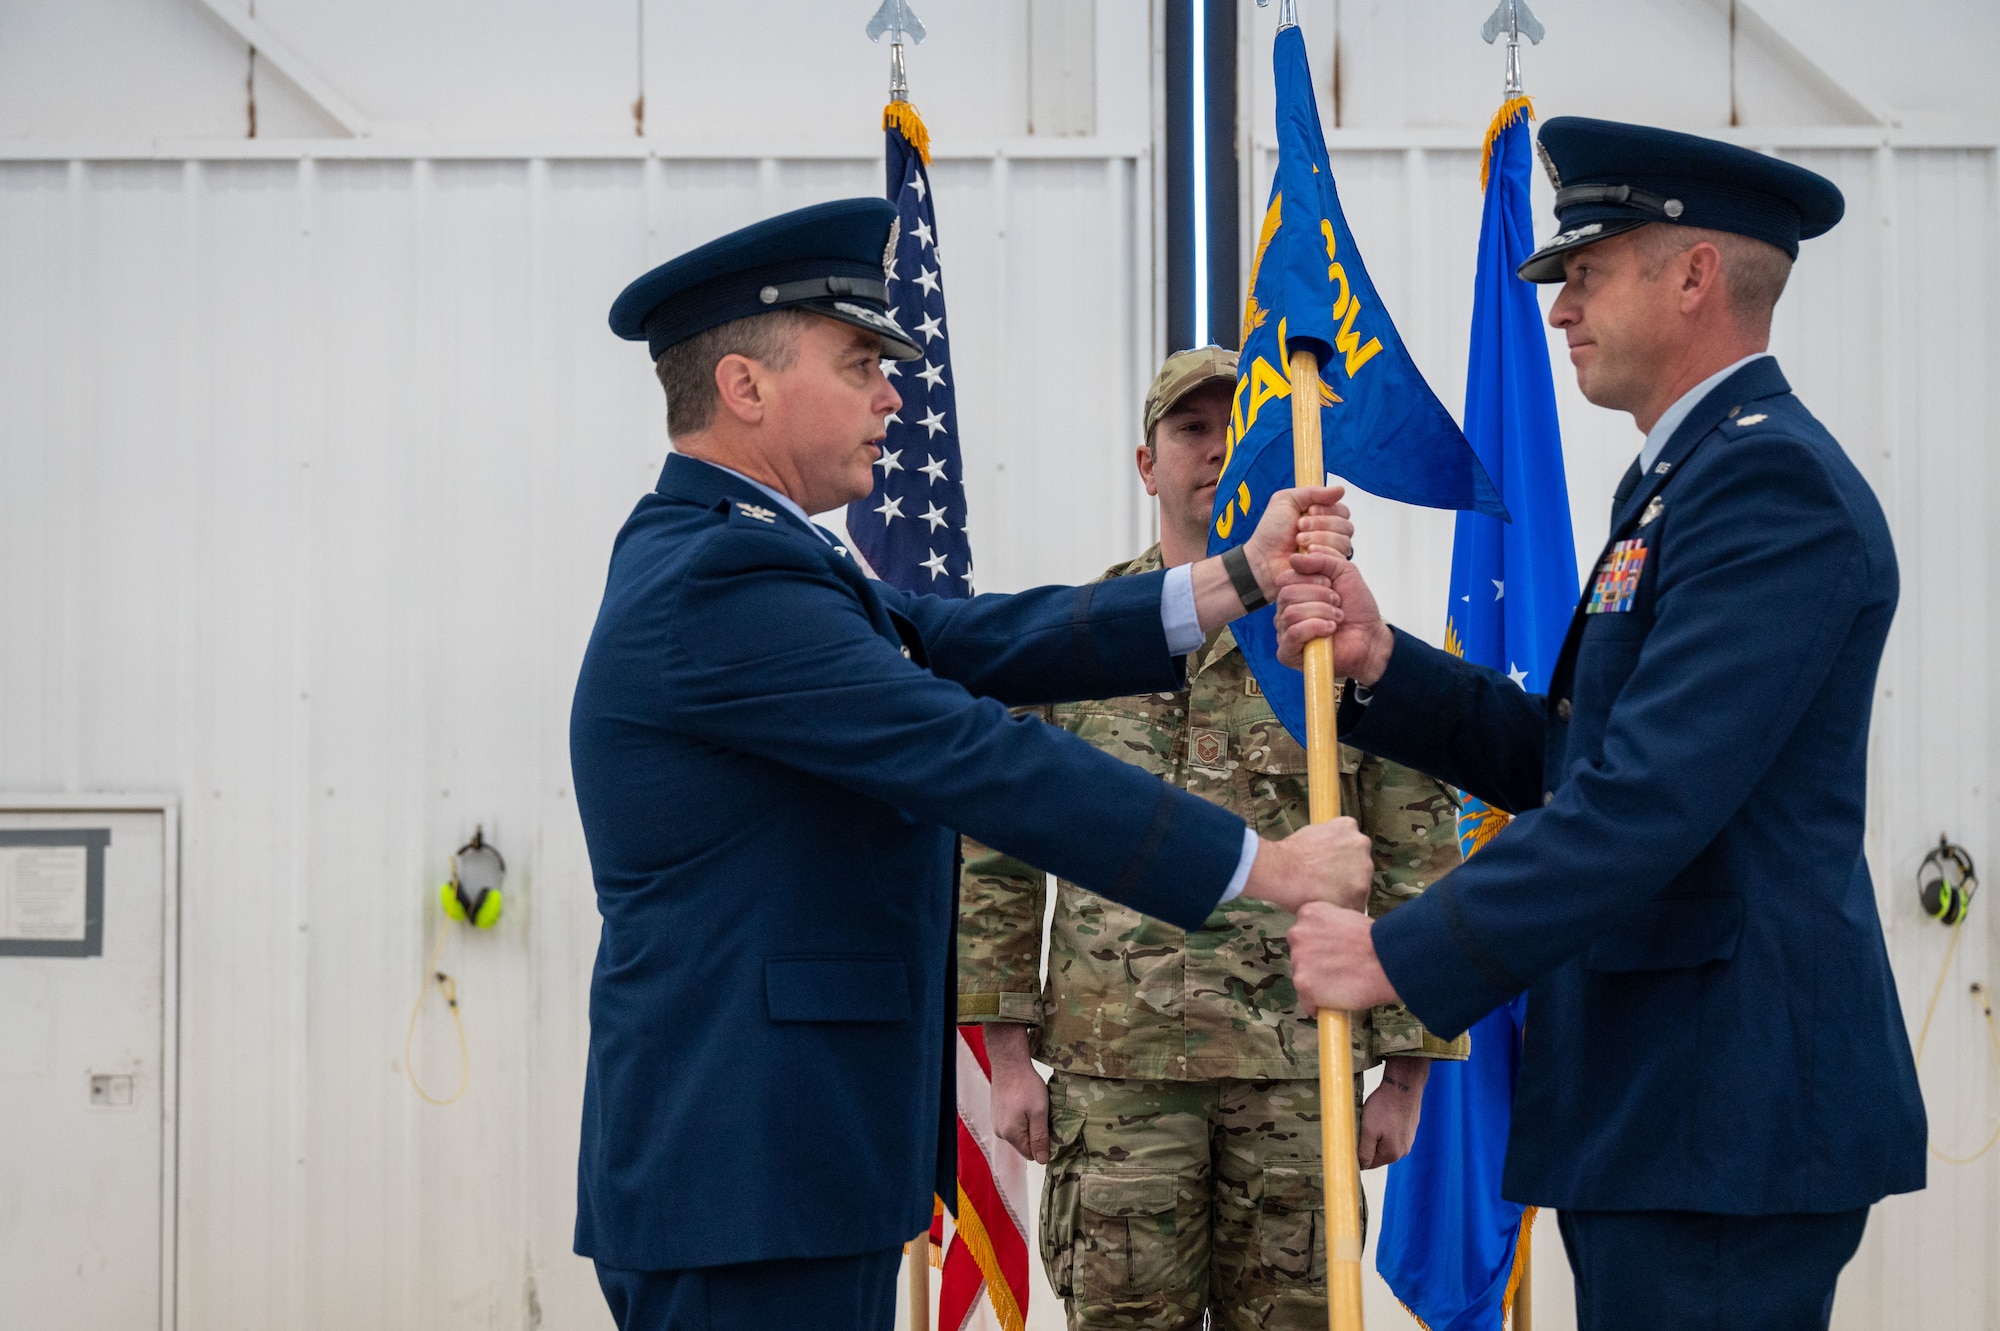 The 27th SOAS is redesignated as the 27th SOTAOS during Change of Command